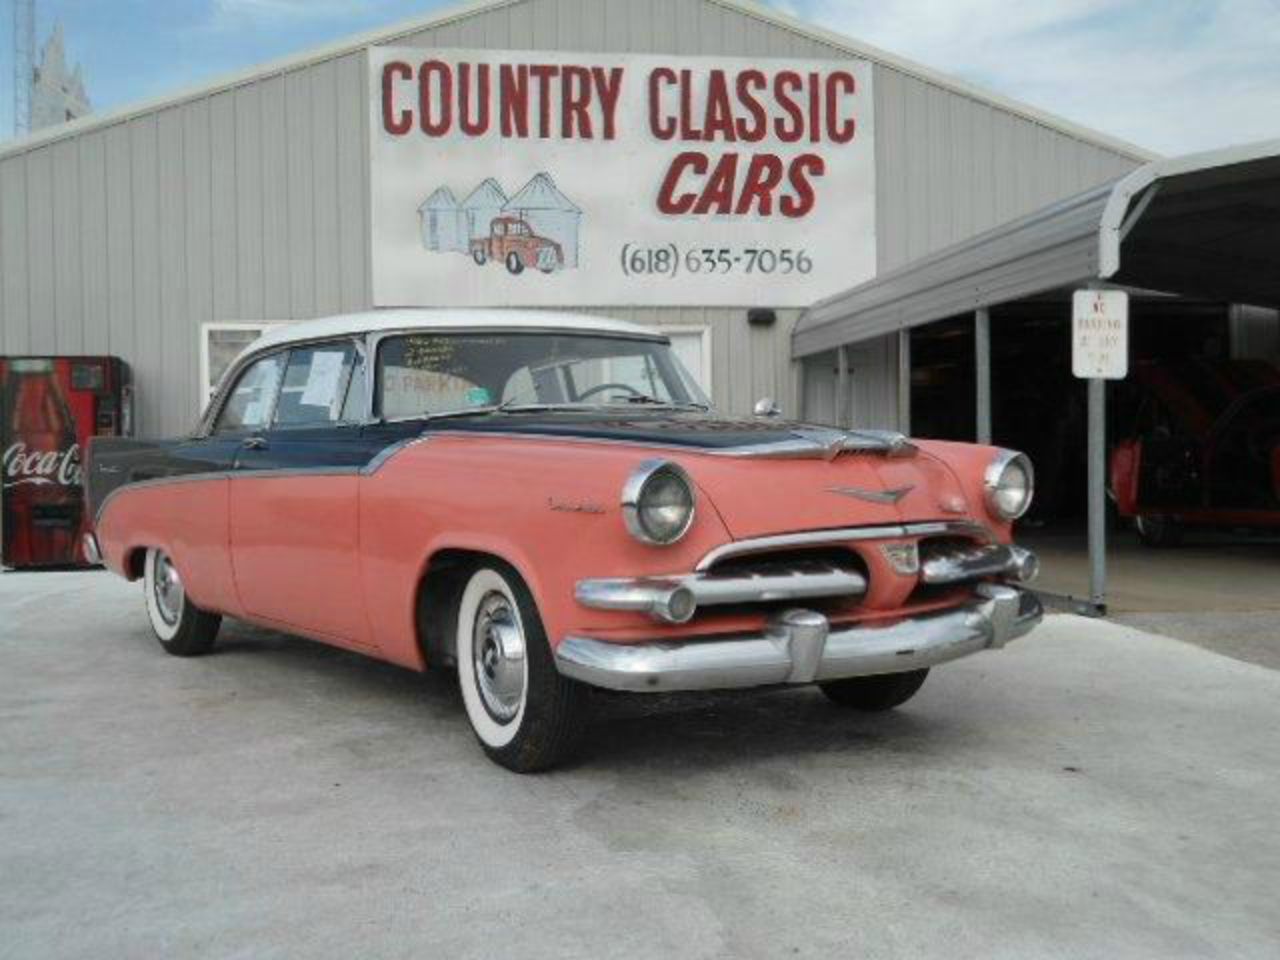 1956 Dodge Coronet 2dr HT, Used Cars For Sale - Carsforsale.com